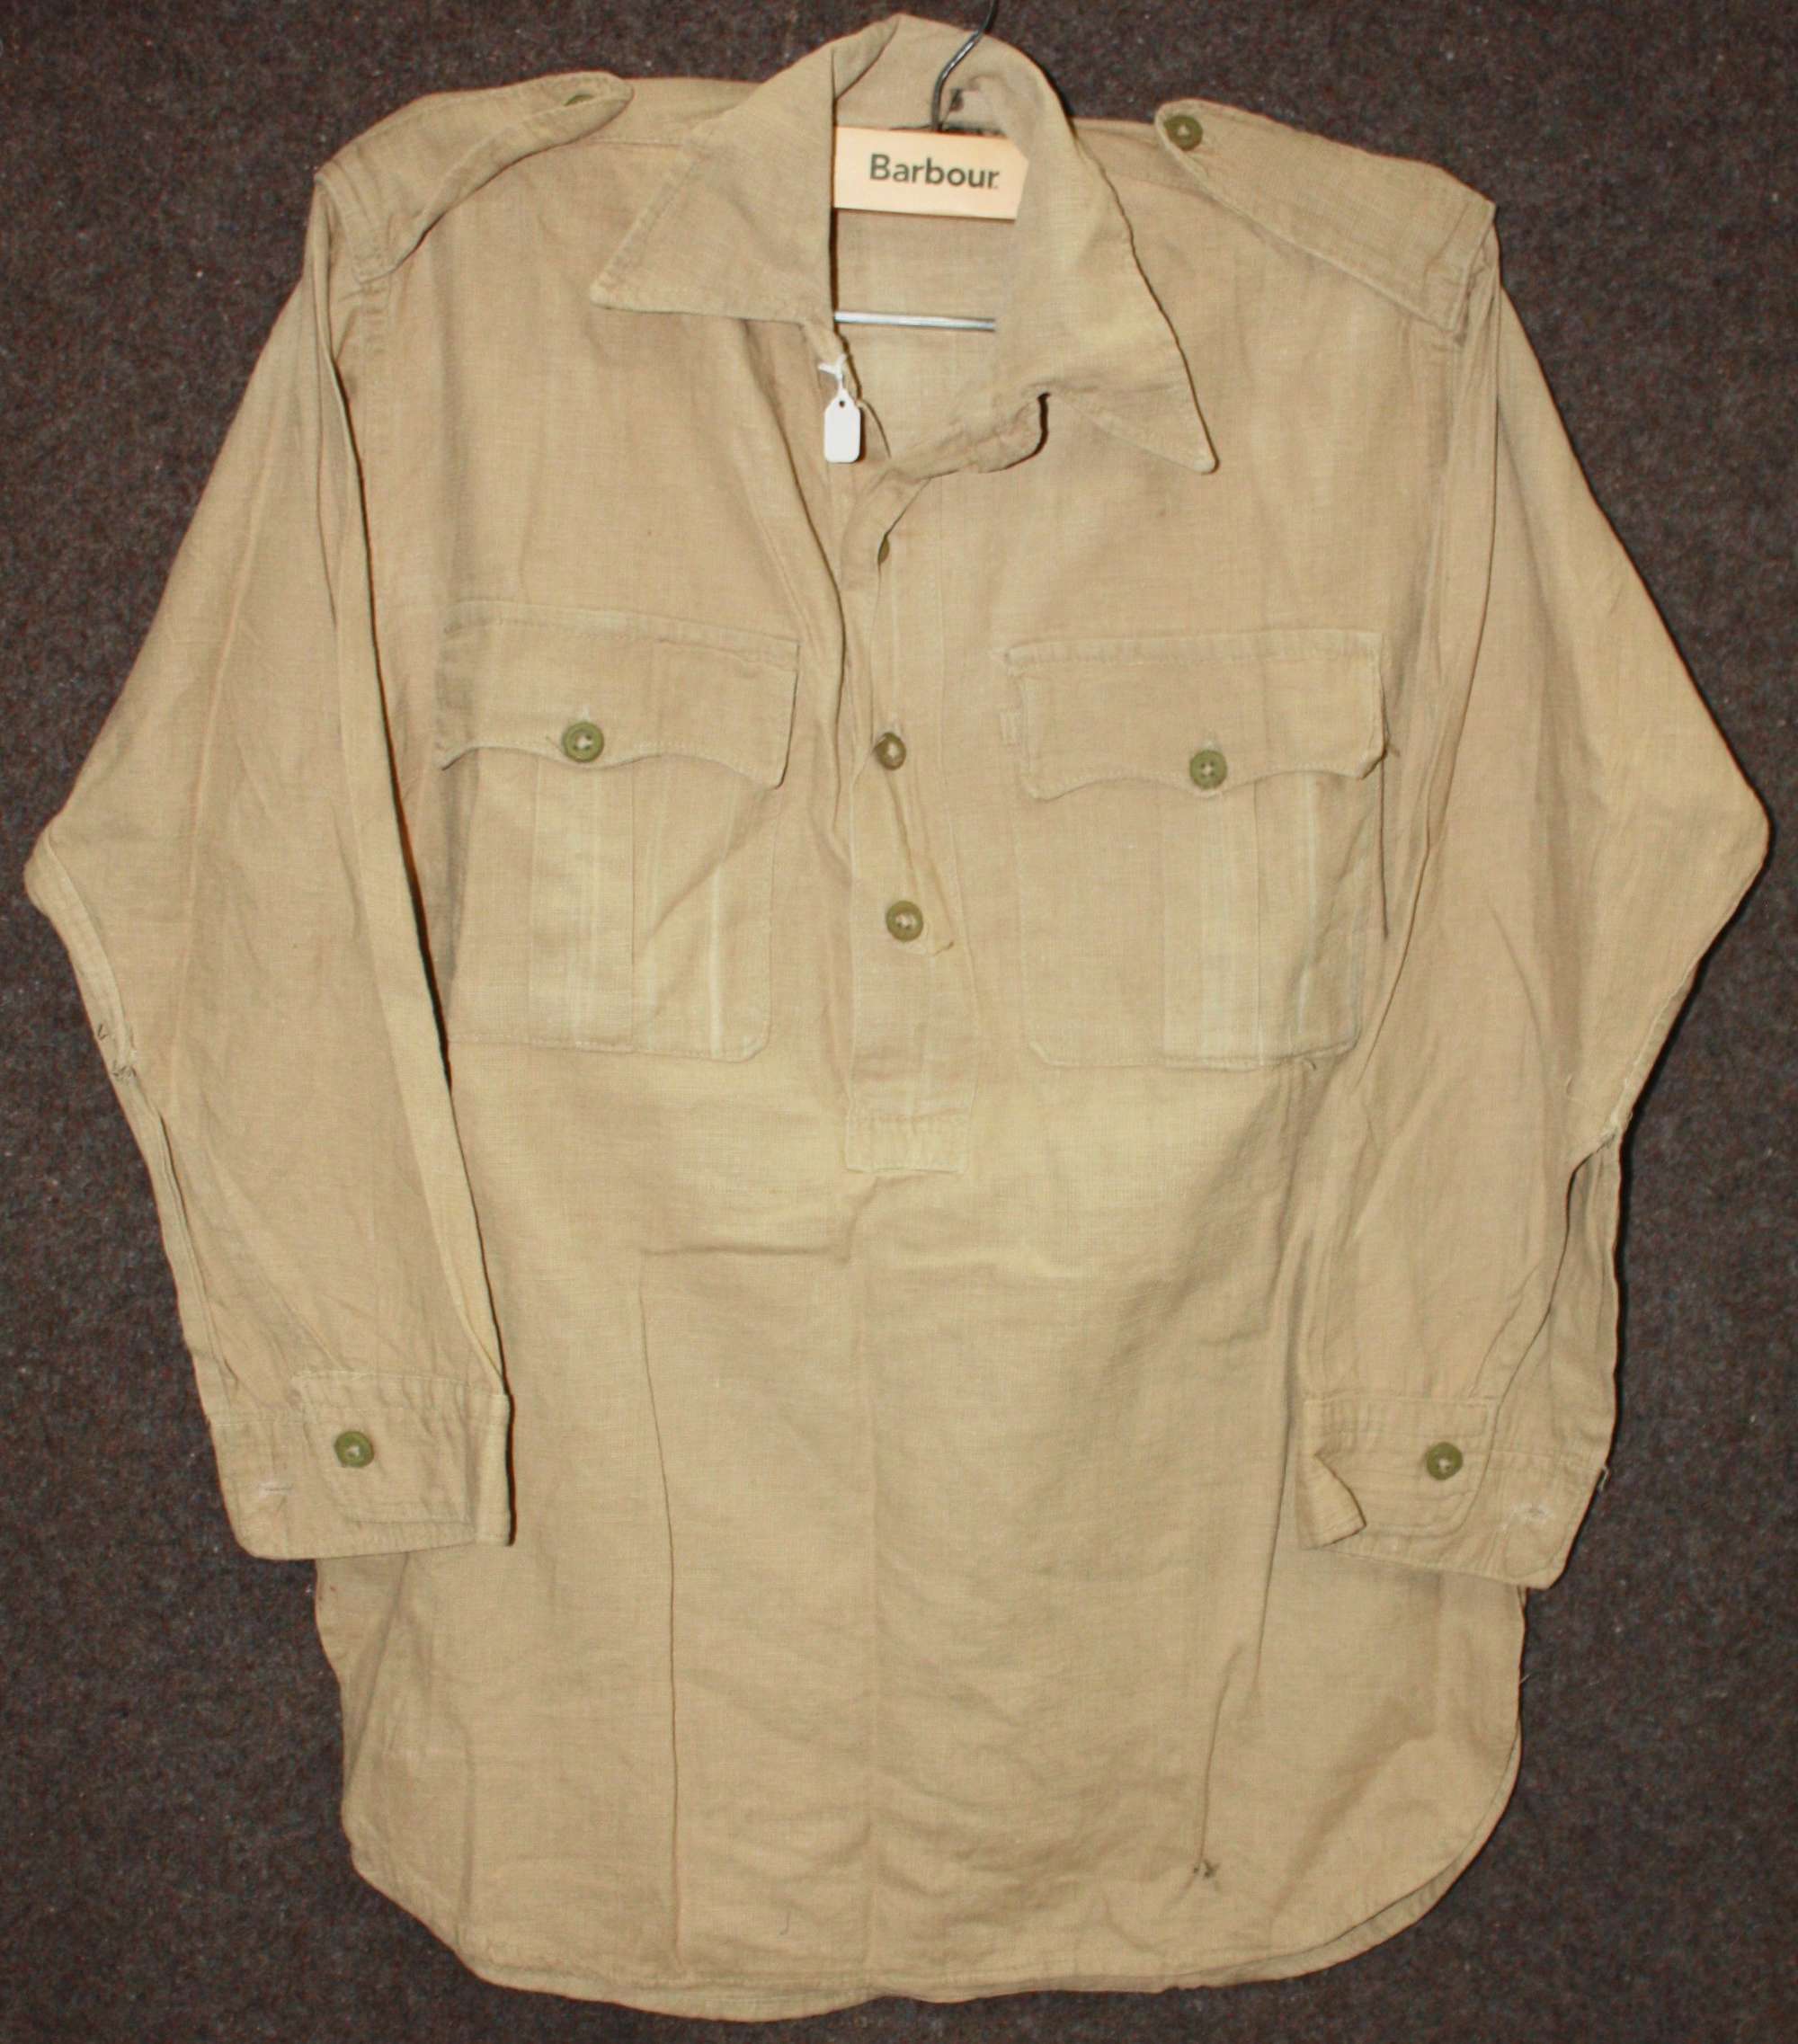 A WWII MANS KD TROPICAL SHIRT 4 BUTTON FRONTED